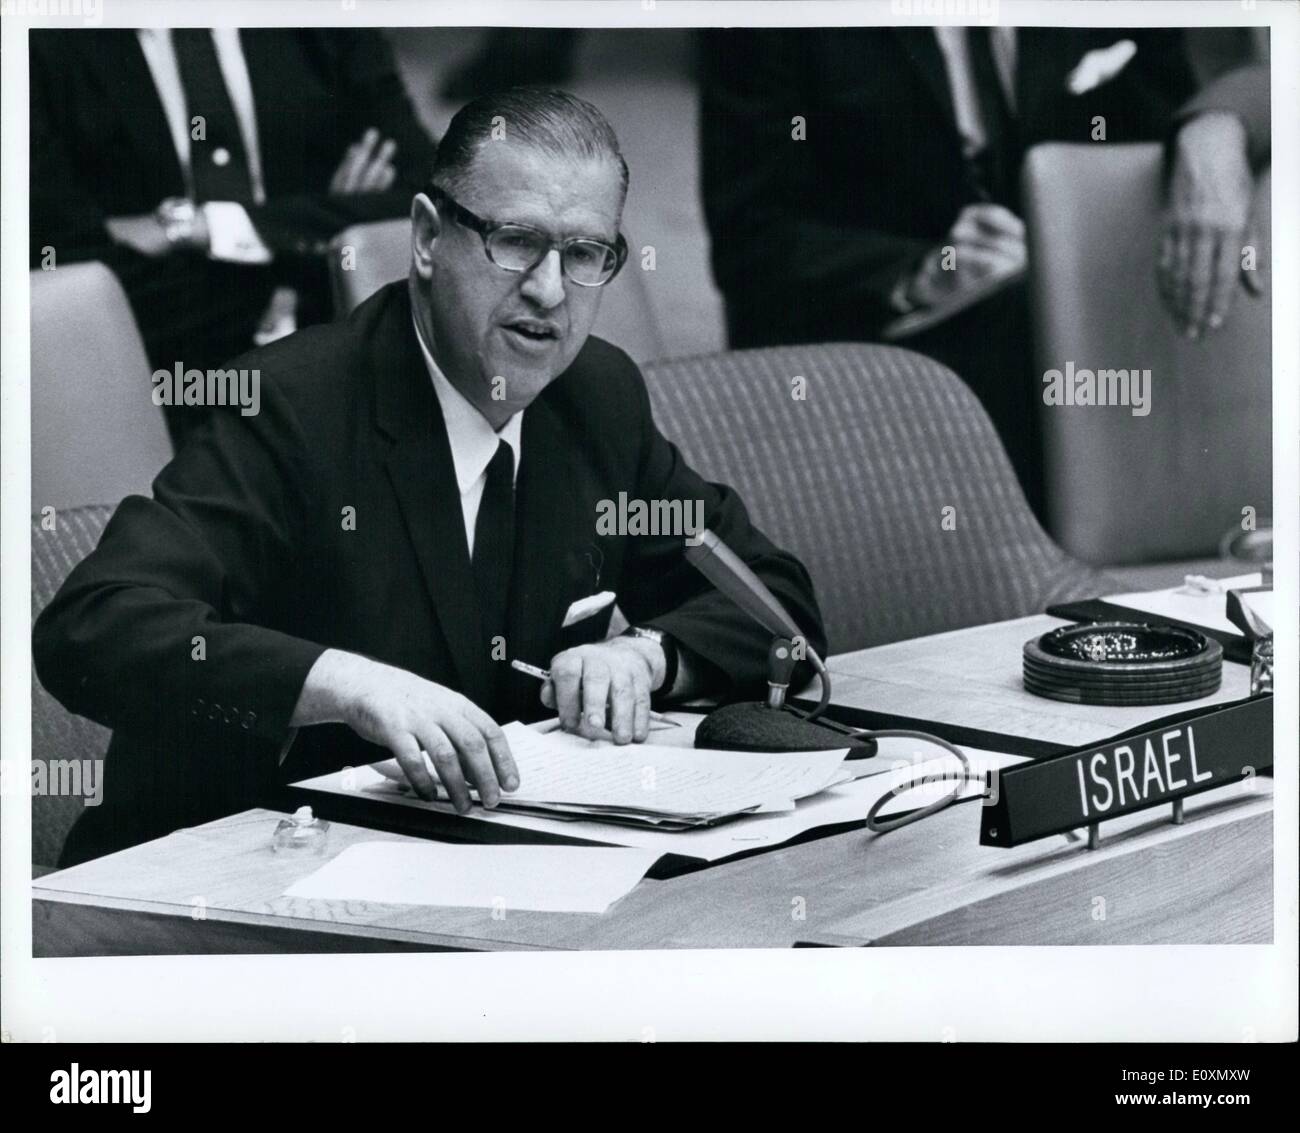 Jun. 06, 1967 - Security Council unanimously calls for cease-fire in Middle East: The security Council tonight unanimously called upon the Government concerned in the present hostilities in the Middle East, ''as a first step, to take forthwith all measures for an immediate cease fire and for a cessation of all military activities in the area''. The Secretary-General was asked to keep the Council Promptly and currently informed on the situation. The draft resolution adopted tonight was put forward at the start of the meeting by the President of the Council. Hans R Stock Photo